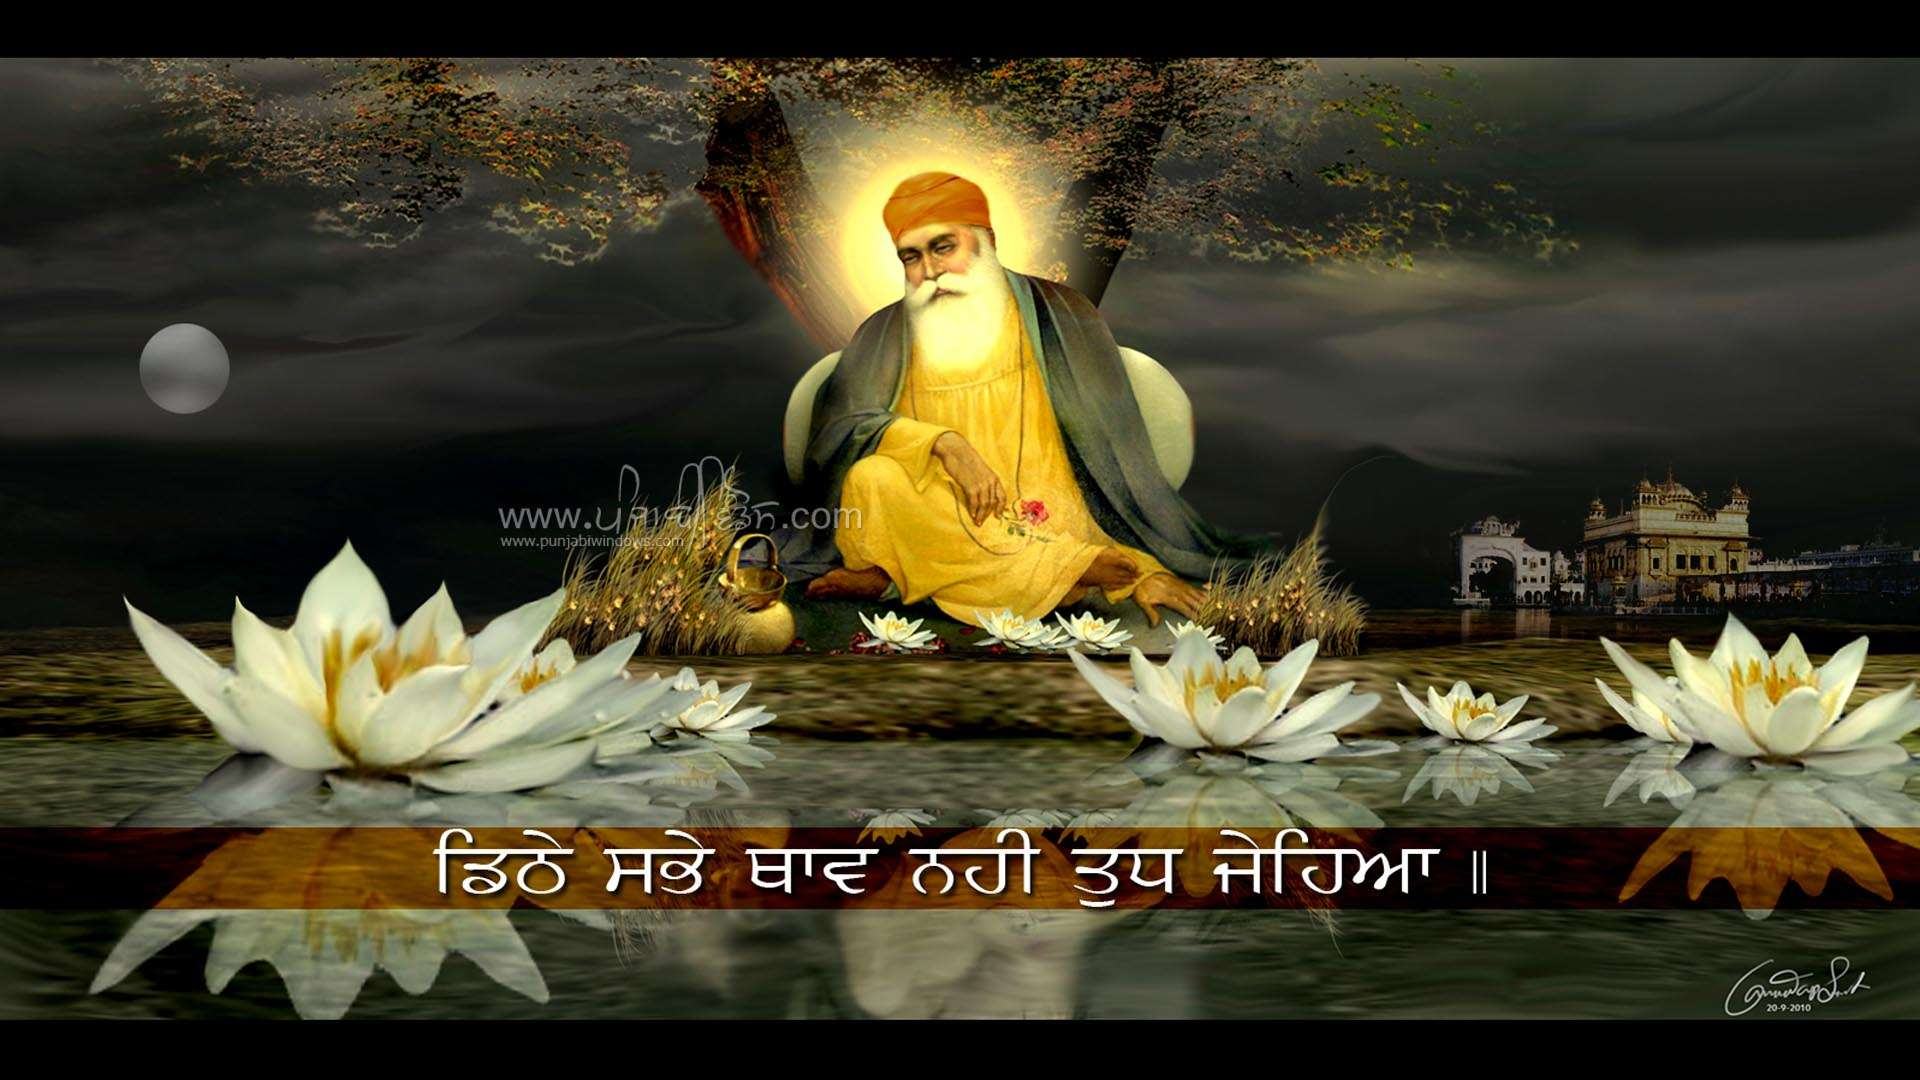 Download Free Wallpapers Backgrounds   Sikh Gurus Wallpapers Sri